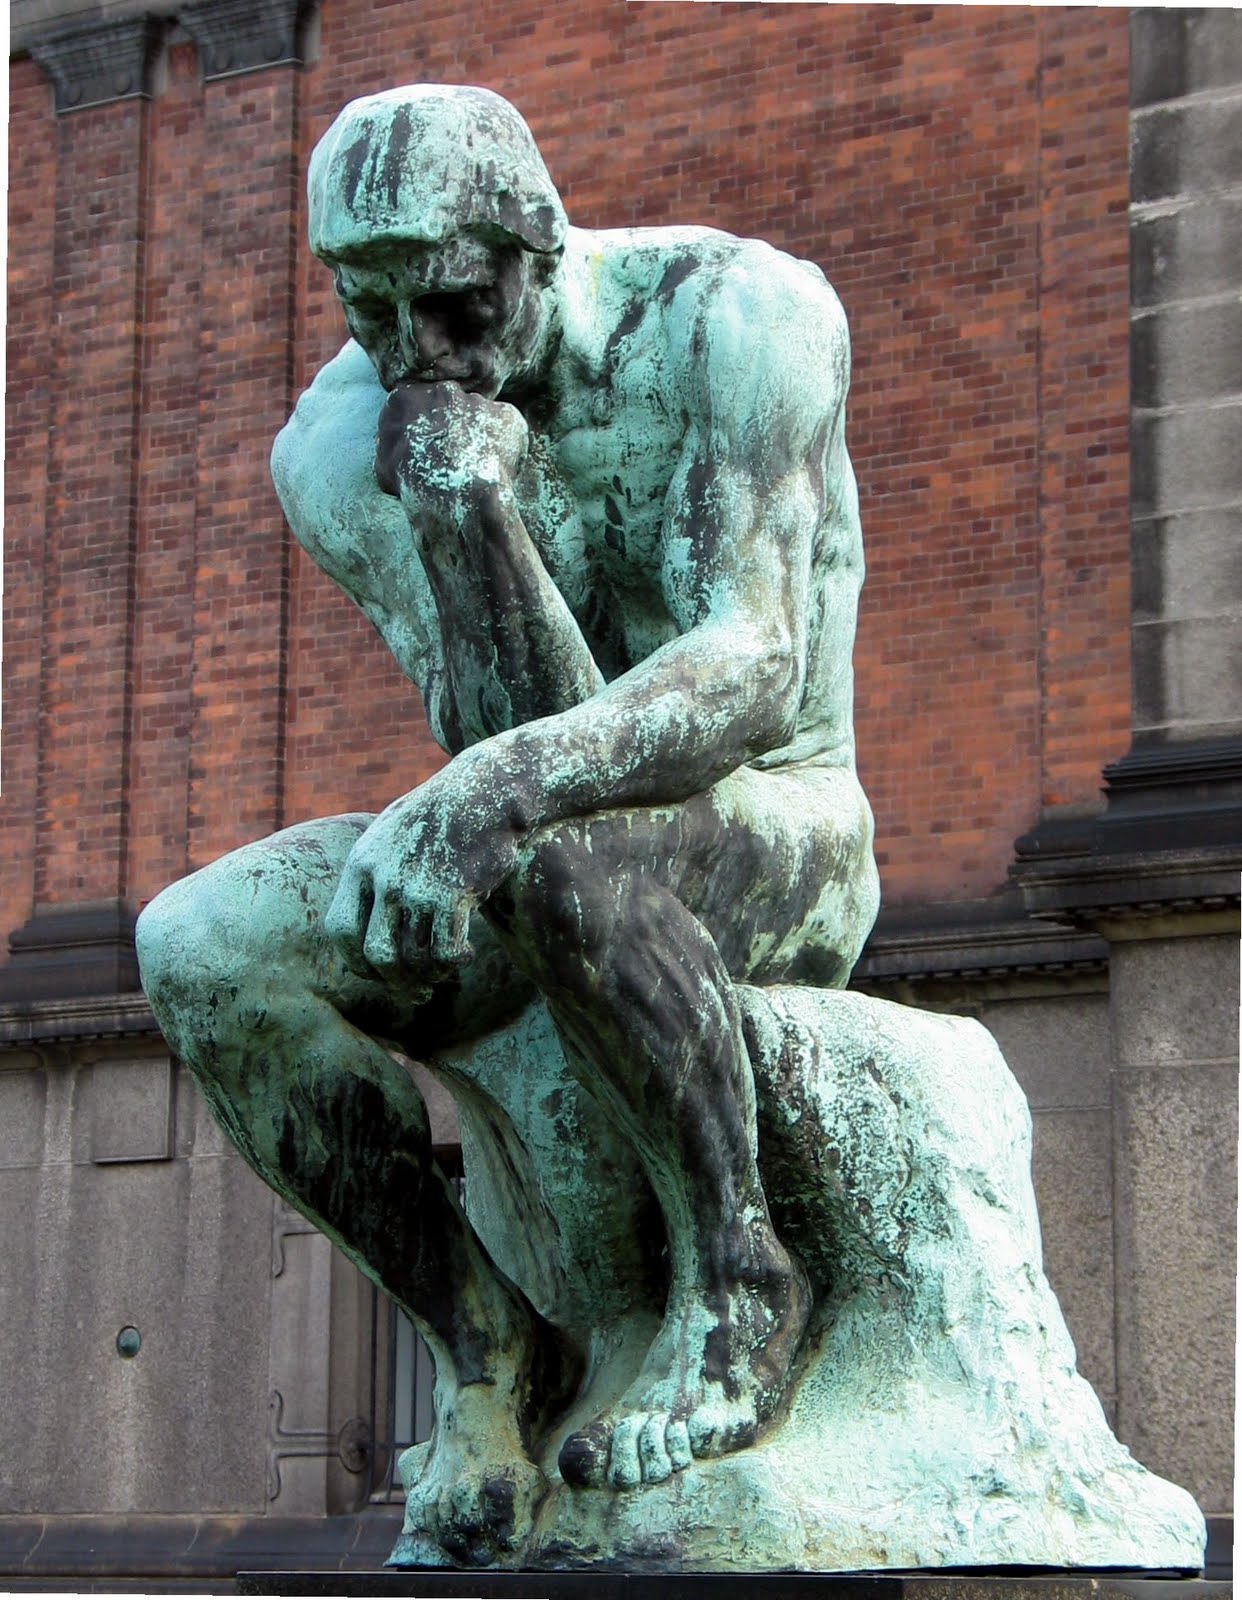 Public Domain Photos and Images: The Thinker, sculpture by 